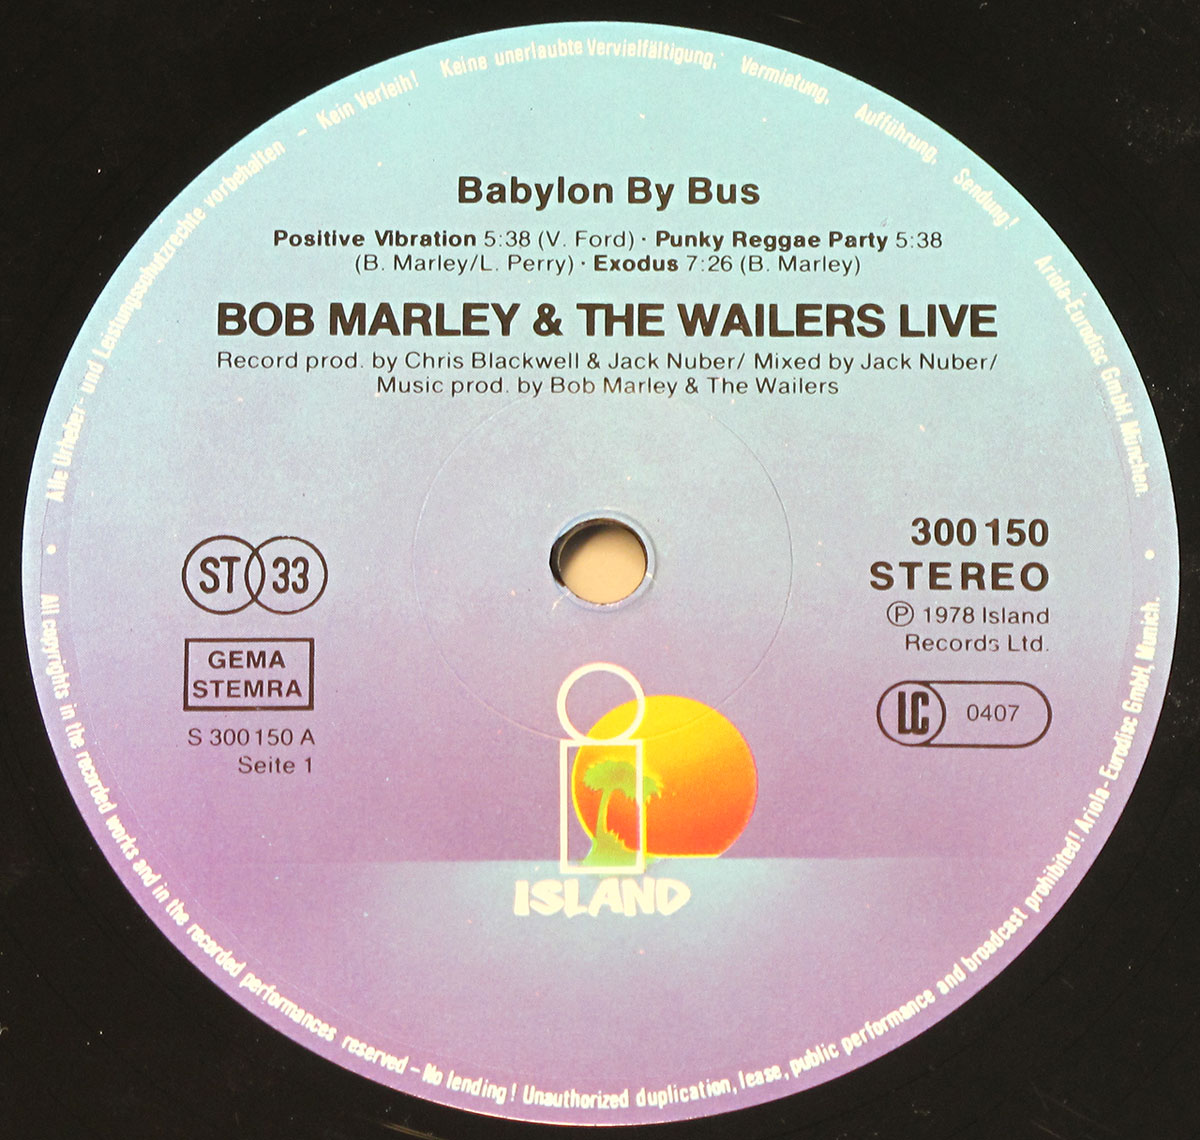 High Resolution Photo close-up Photo of  "Babylon by Bus" Record Label